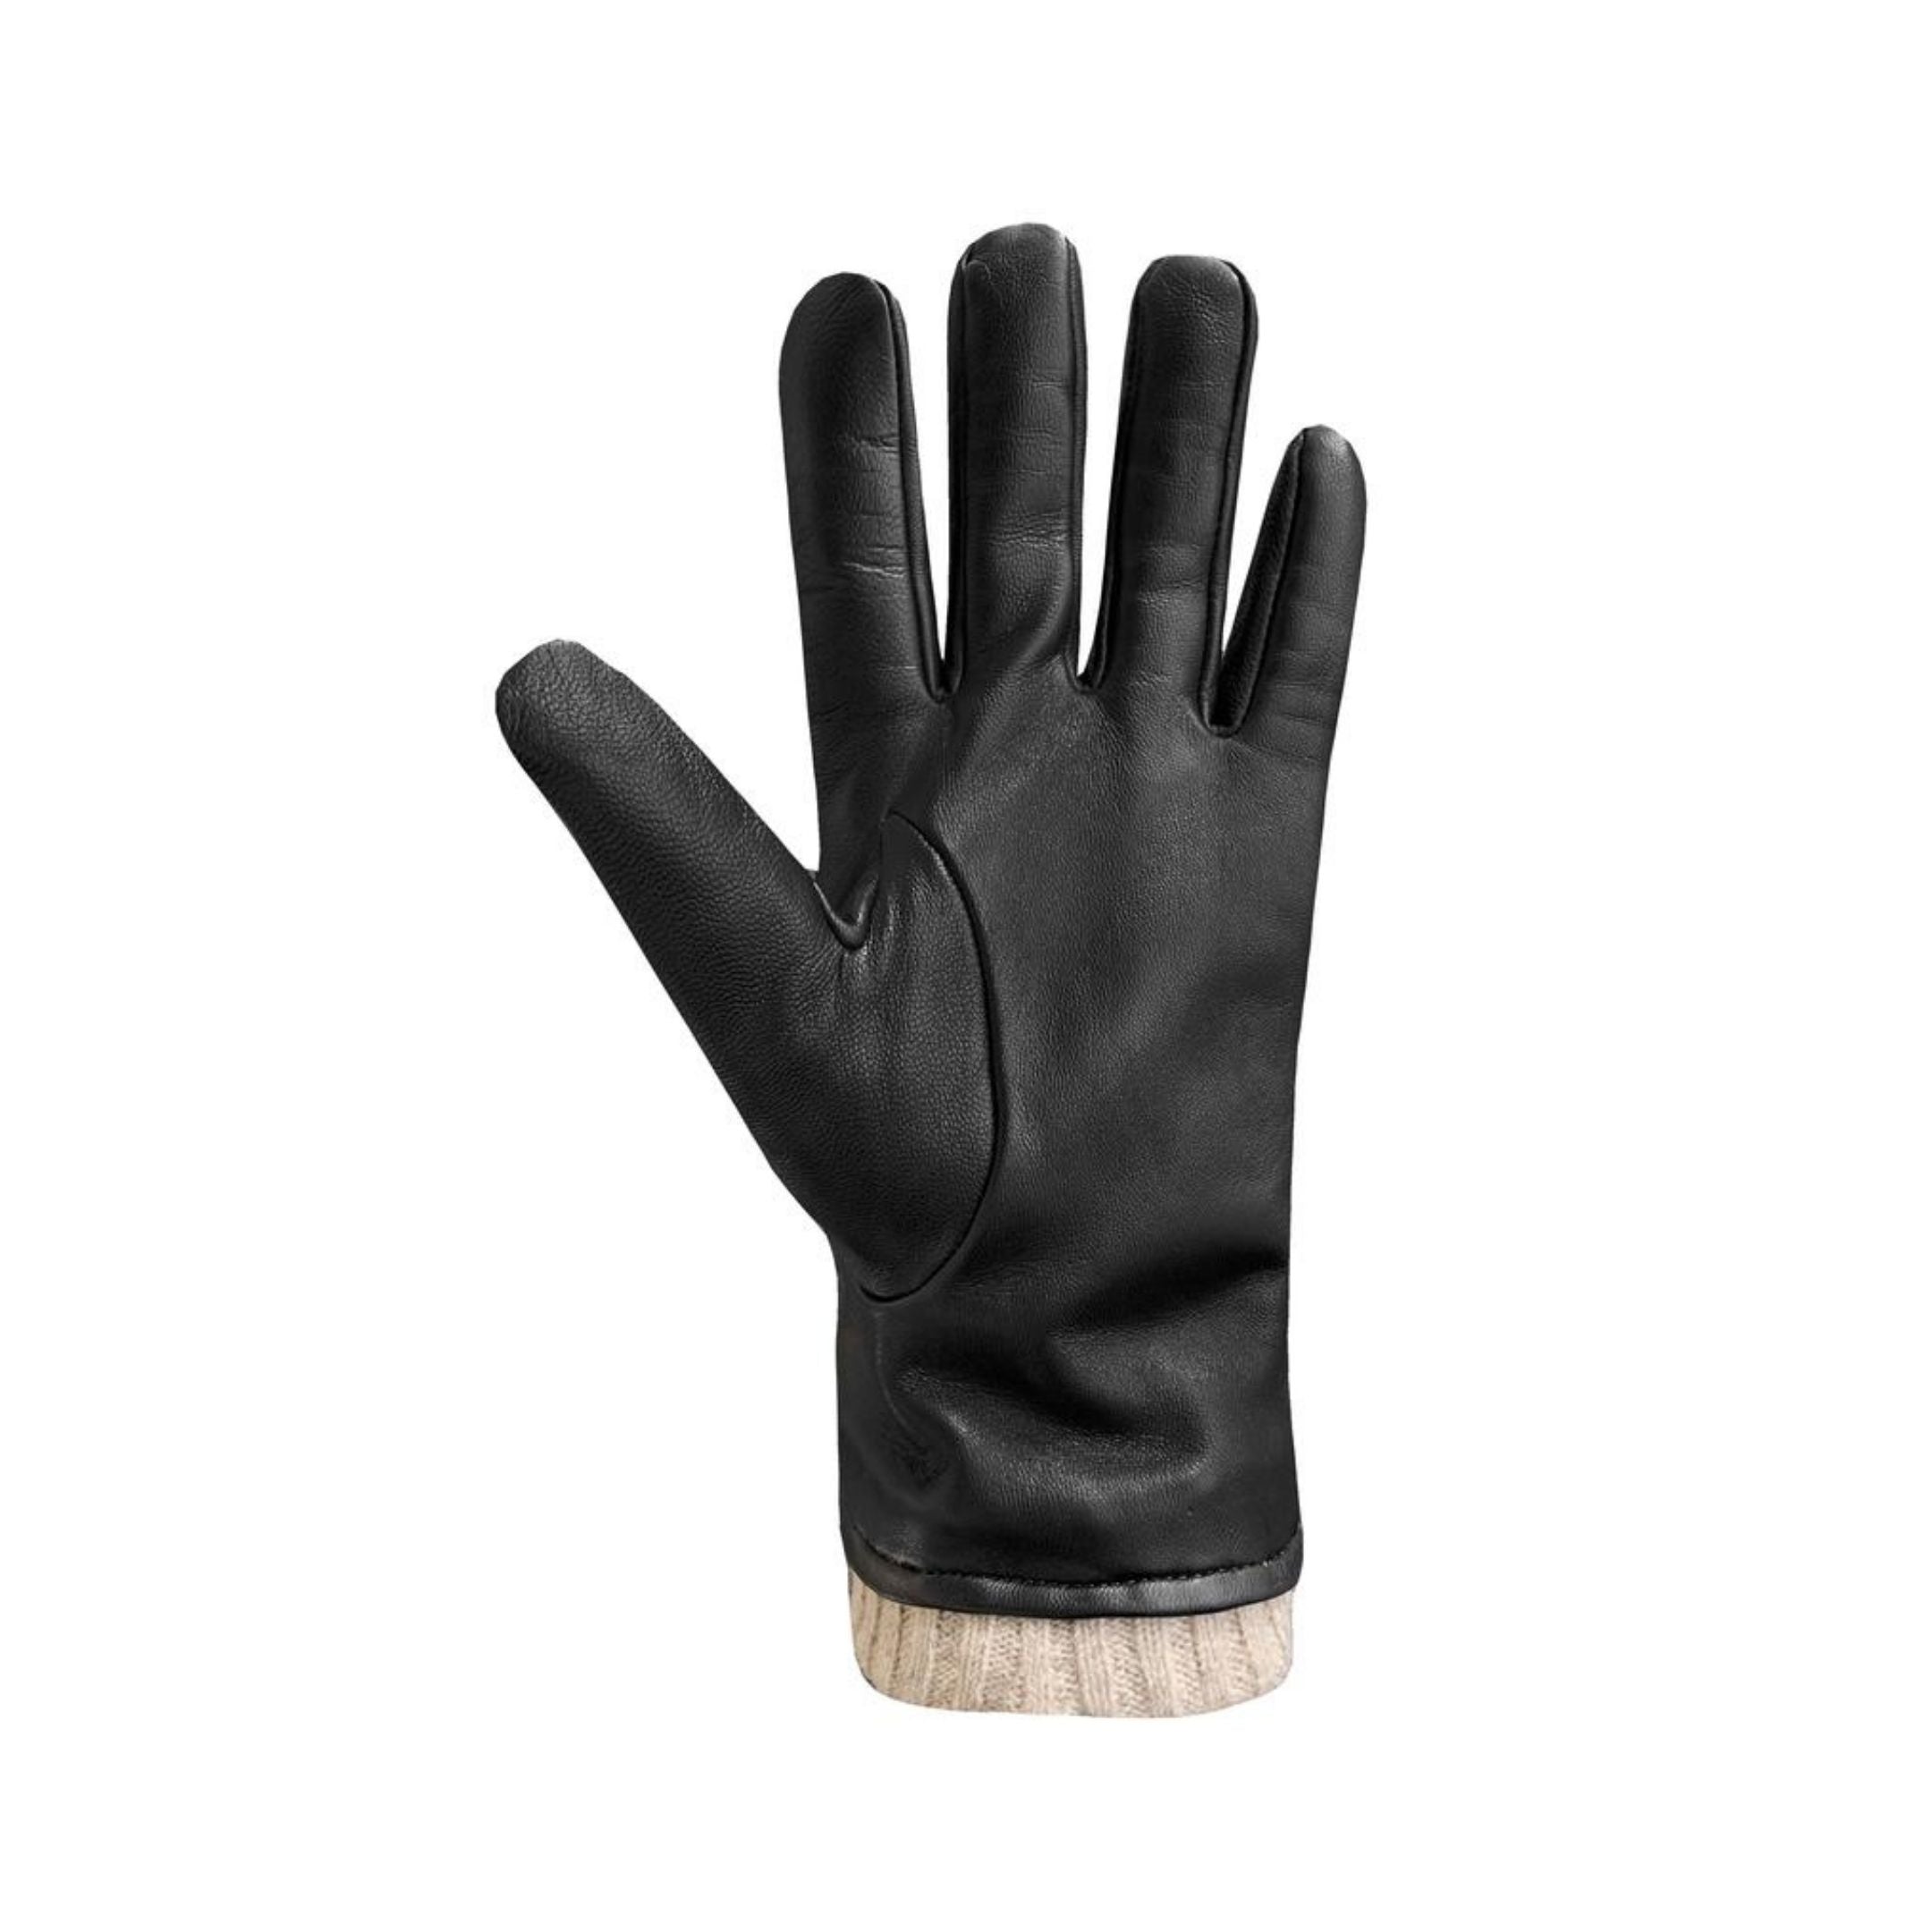 Palm side of black leather finger gloves showing fabric cuff peaking out